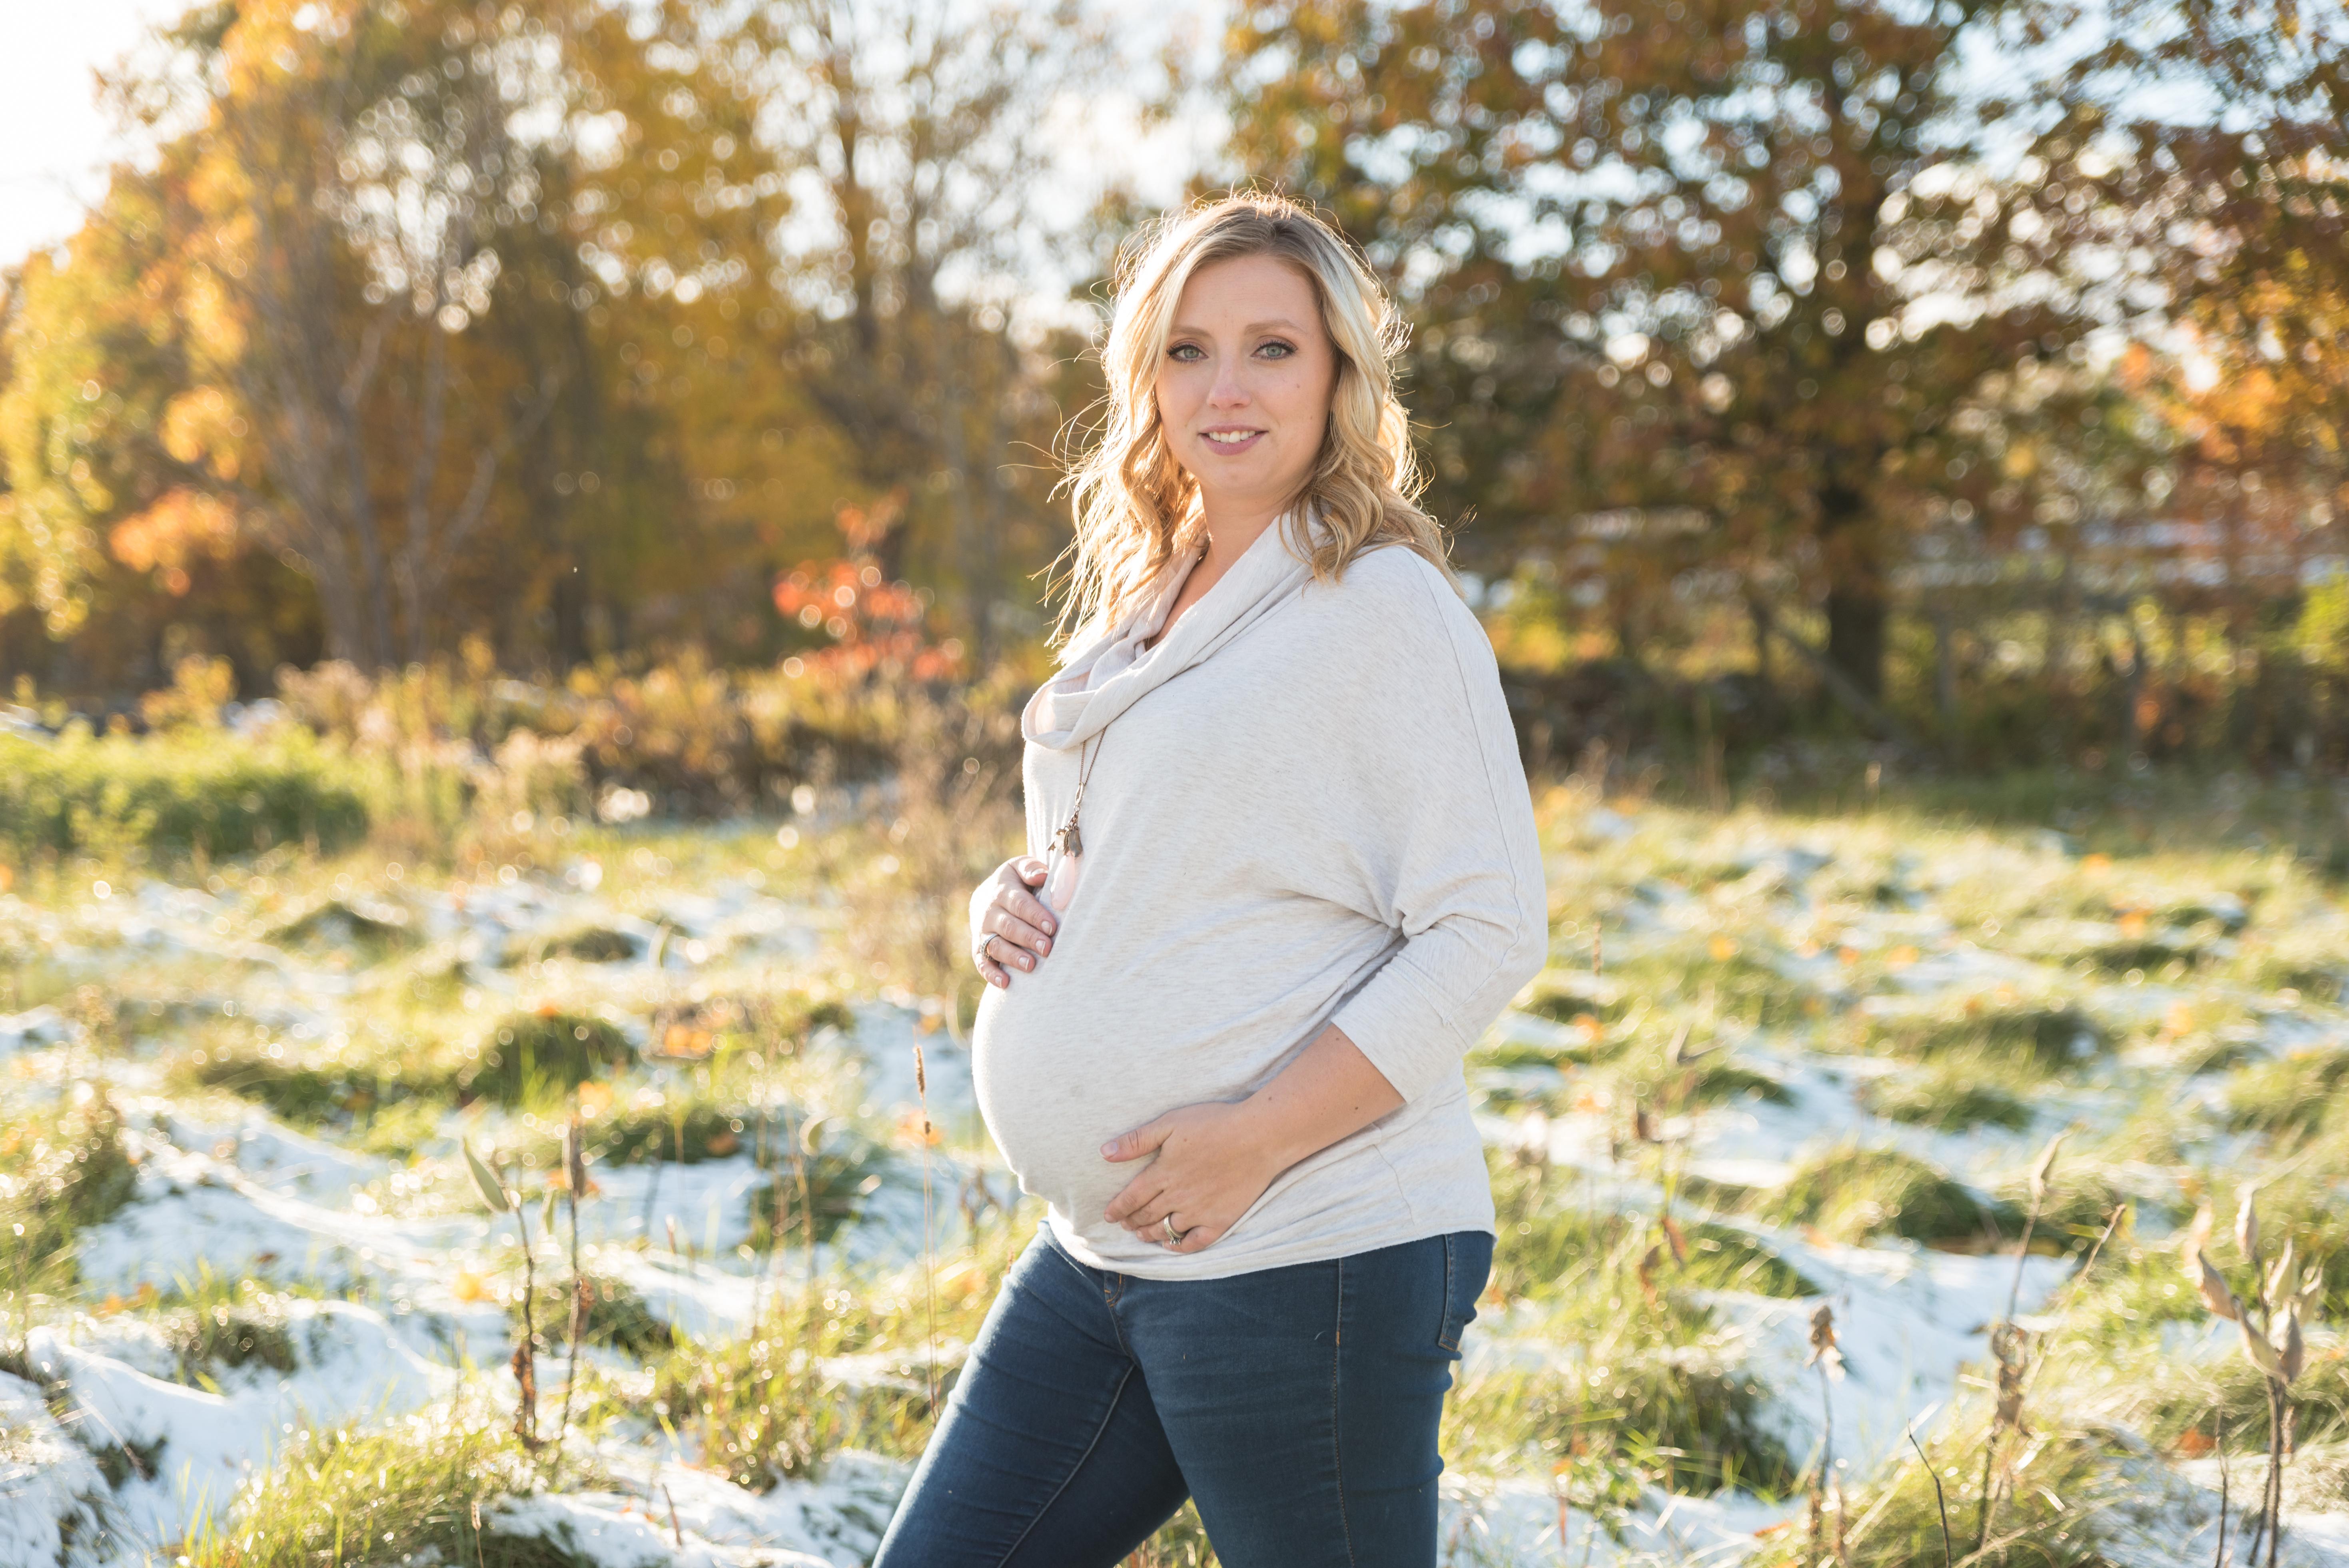 Whitefield Maternity Photographer 5 - Maternity Photography